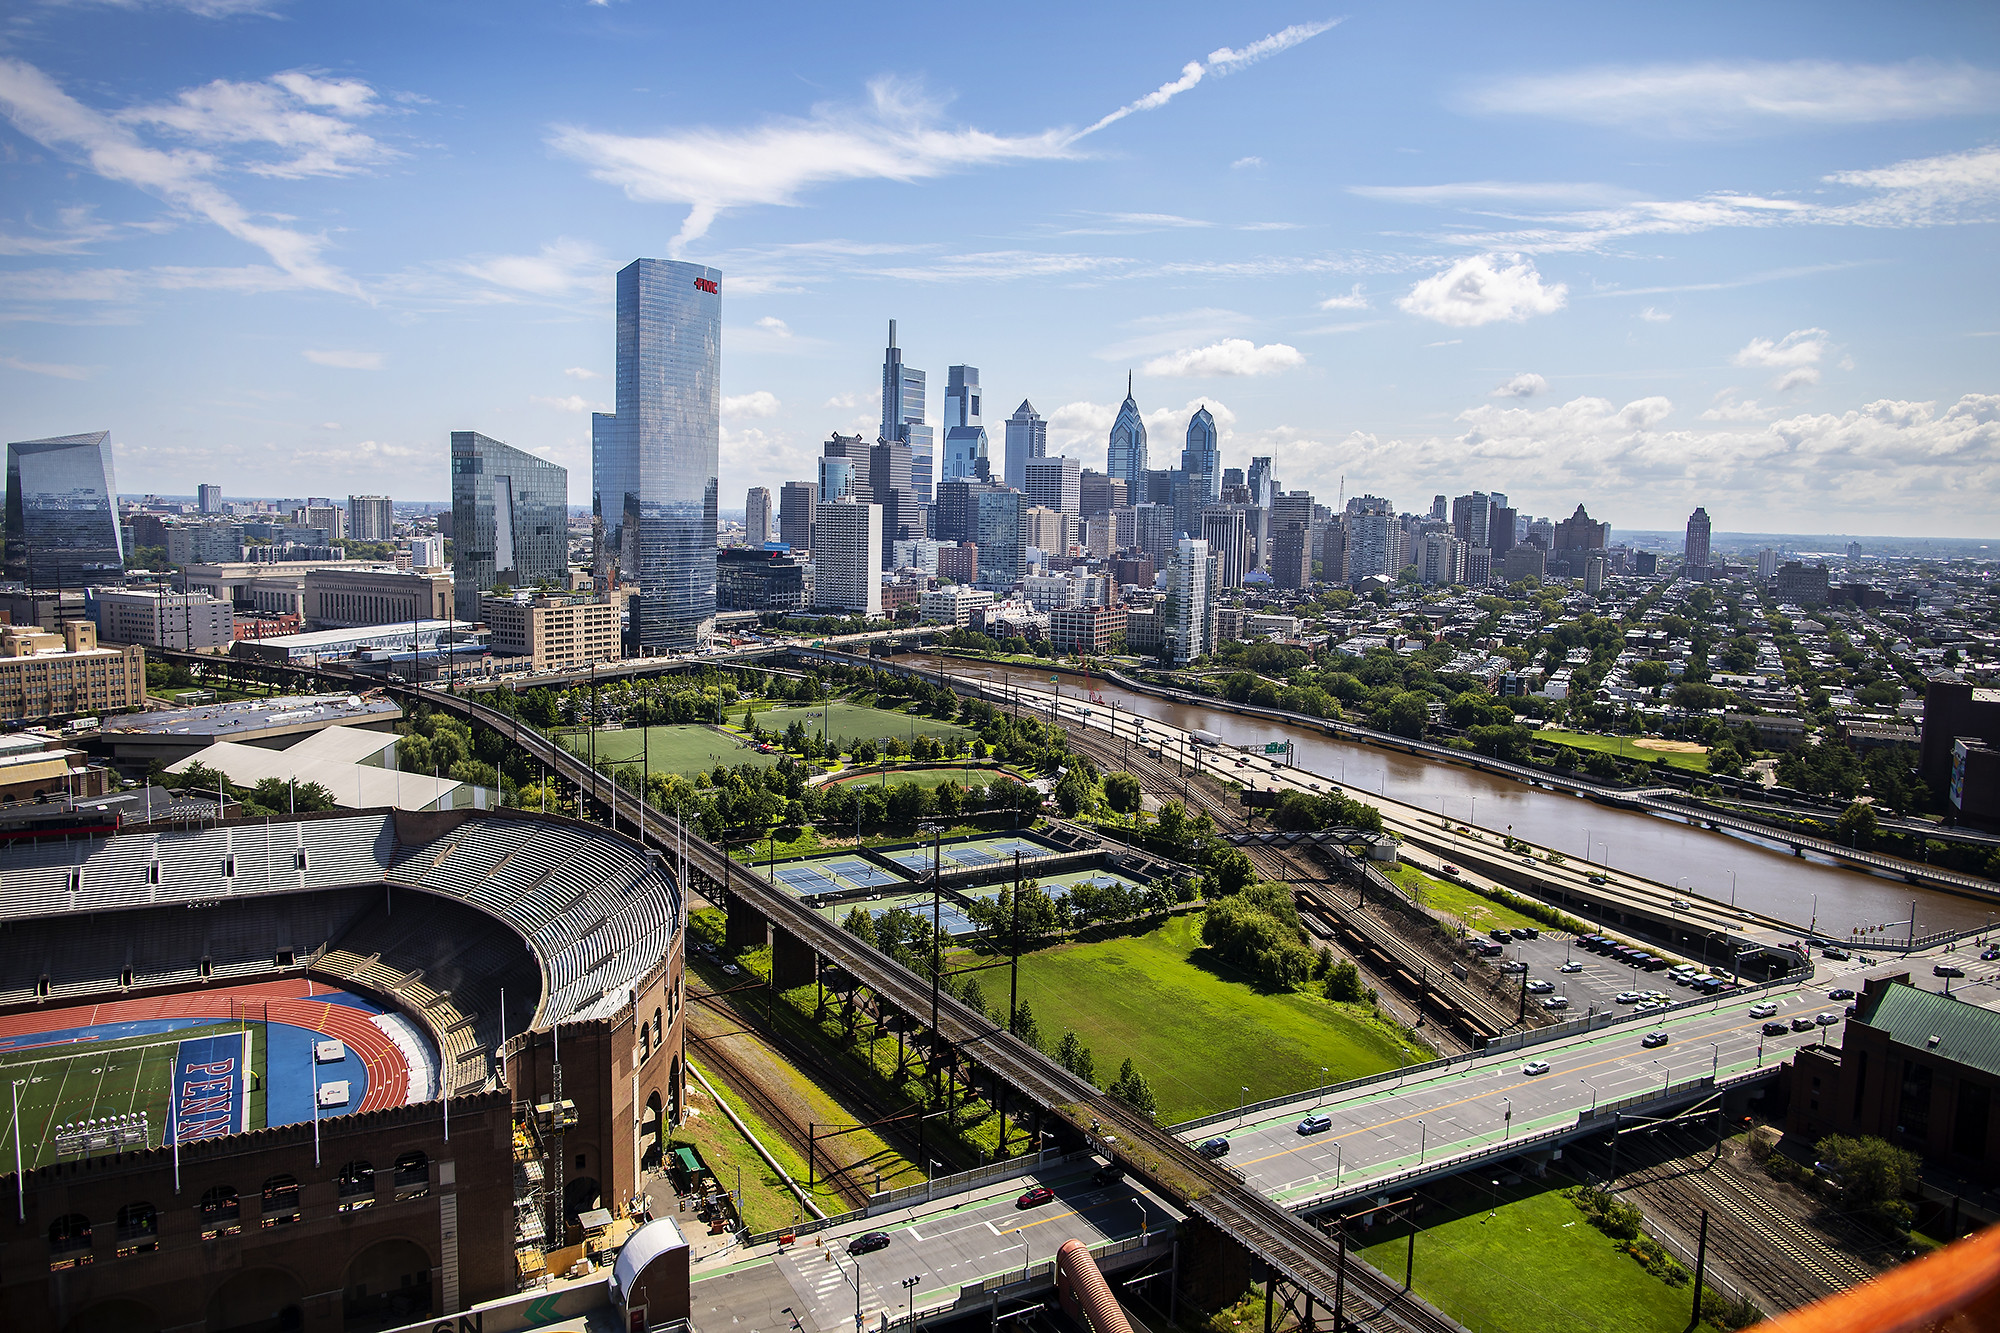 Penn Park and Franklin Field, with the Philadelphia skyline in the background.